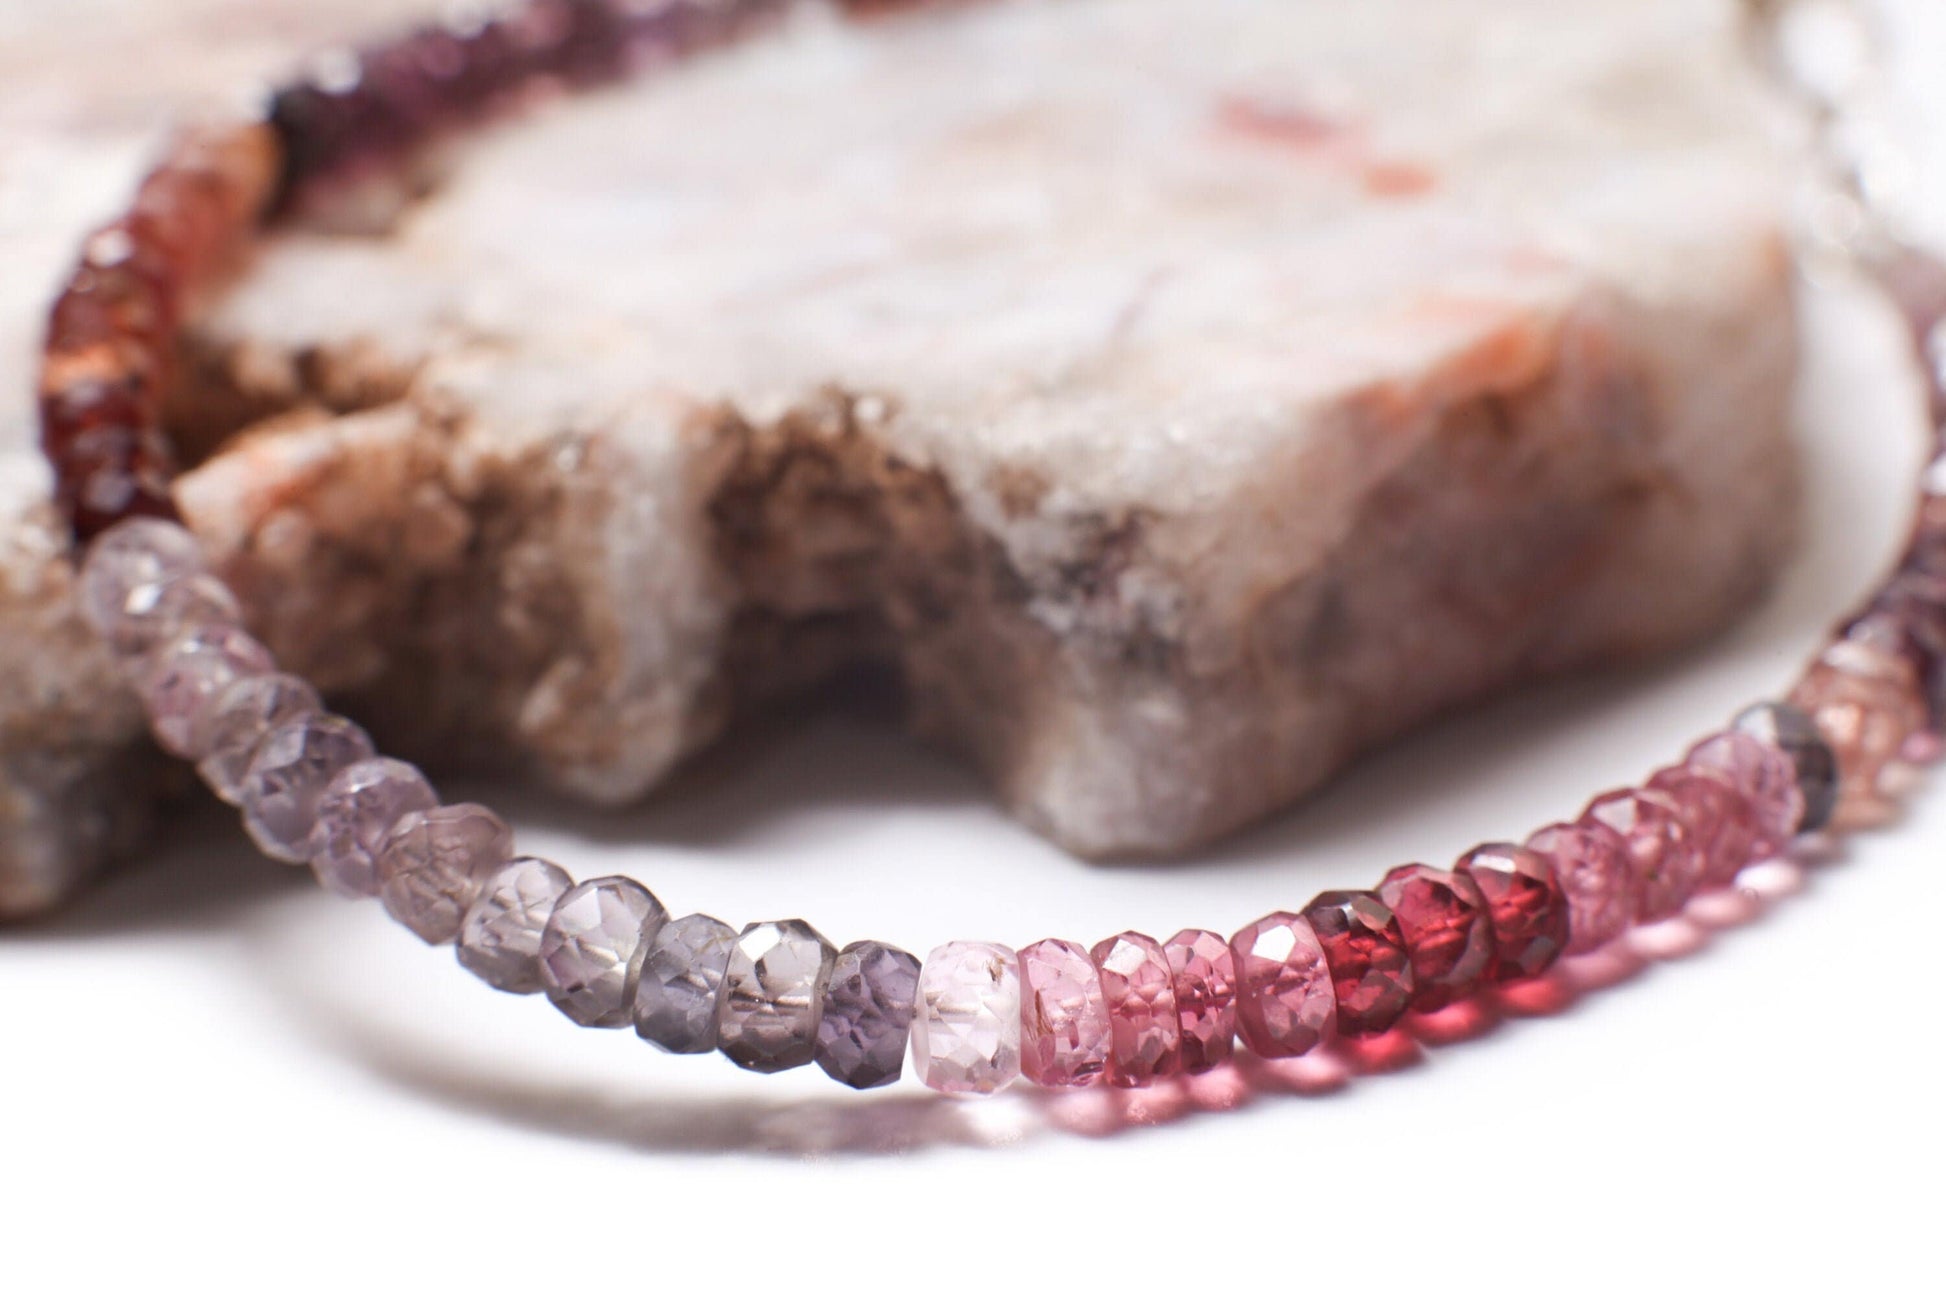 Genuine Multi Spinel Faceted Rondelle 3.5-4mm Bracelet in 925 Sterling Silver, 14K Gold Filled Clasp and Optional 1&quot; Extension Chain